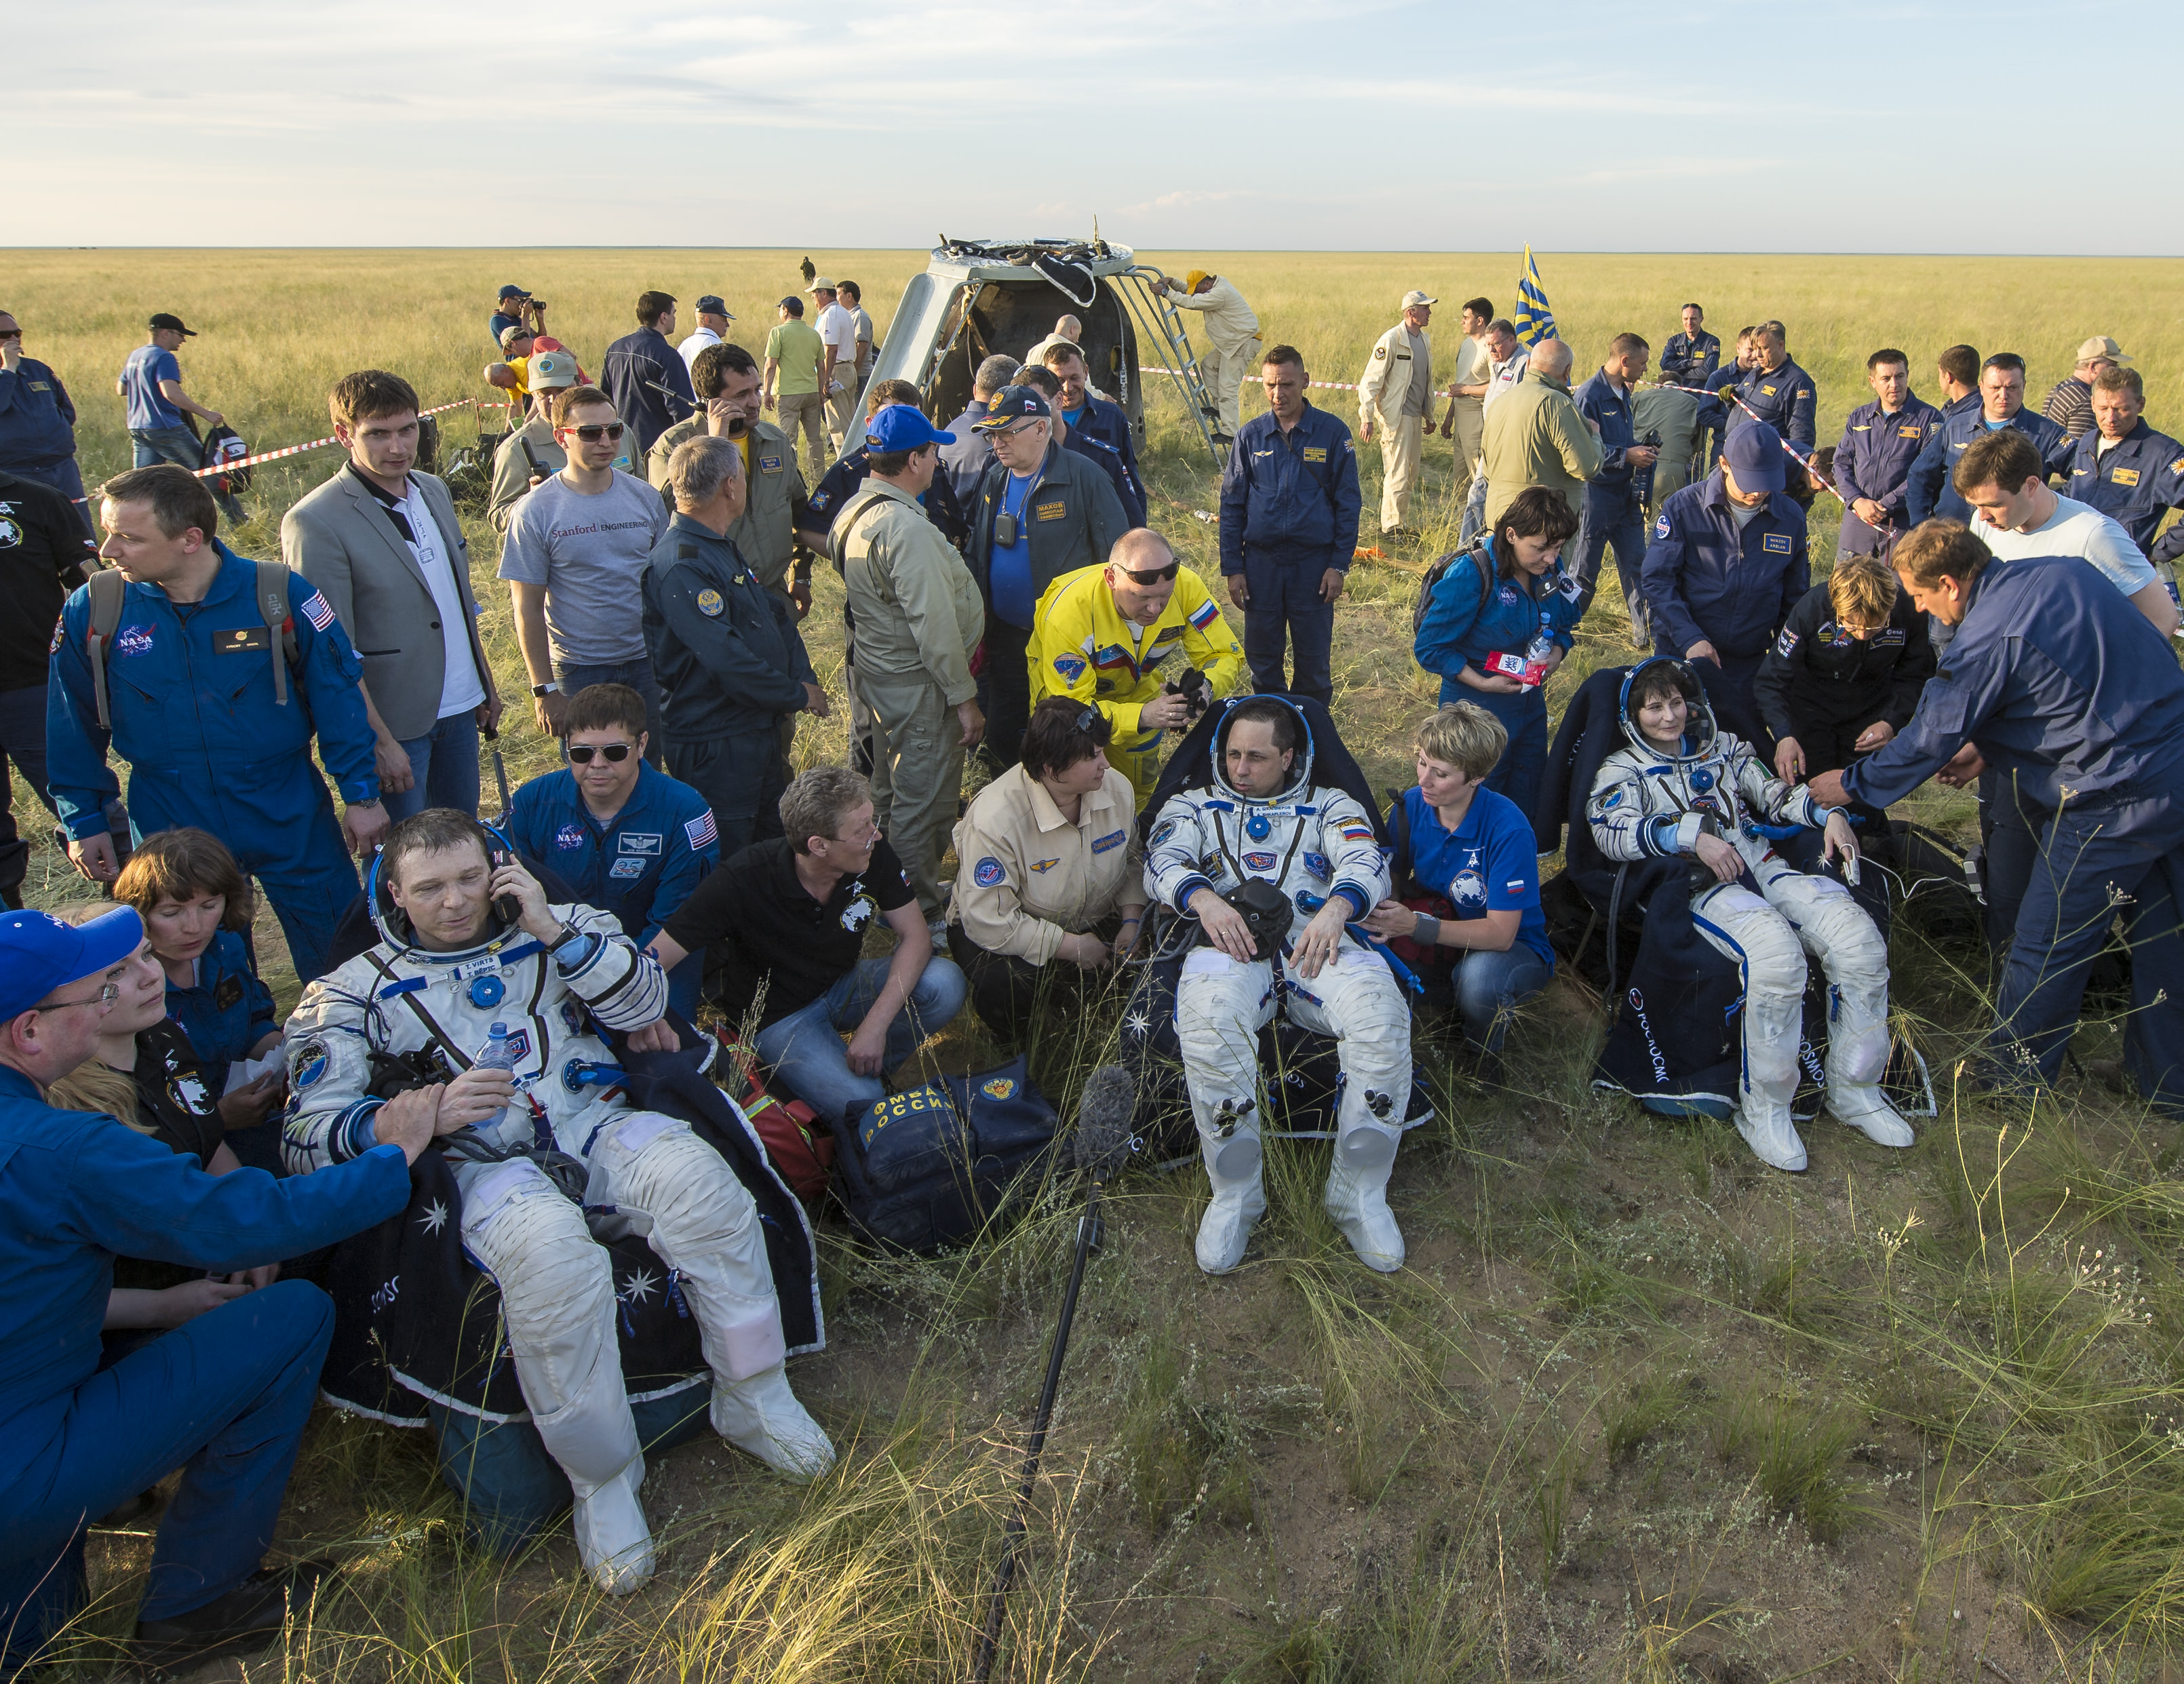 Expedition 43 commander Terry Virts of NASA, left, cosmonaut Anton Shkaplerov of the Russian Federal Space Agency (Roscosmos), center, and Italian astronaut Samantha Cristoforetti from European Space Agency (ESA) sit in chairs outside the Soyuz TMA-15M spacecraft just minutes after they landed in a remote area near the town of Zhezkazgan, Kazakhstan on Thursday, June 11, 2015. Virtz, Shkaplerov, and Cristoforetti are returning after more than six months onboard the International Space Station where they served as members of the Expedition 42 and 43 crews. Photo Credit: (NASA/Bill Ingalls)